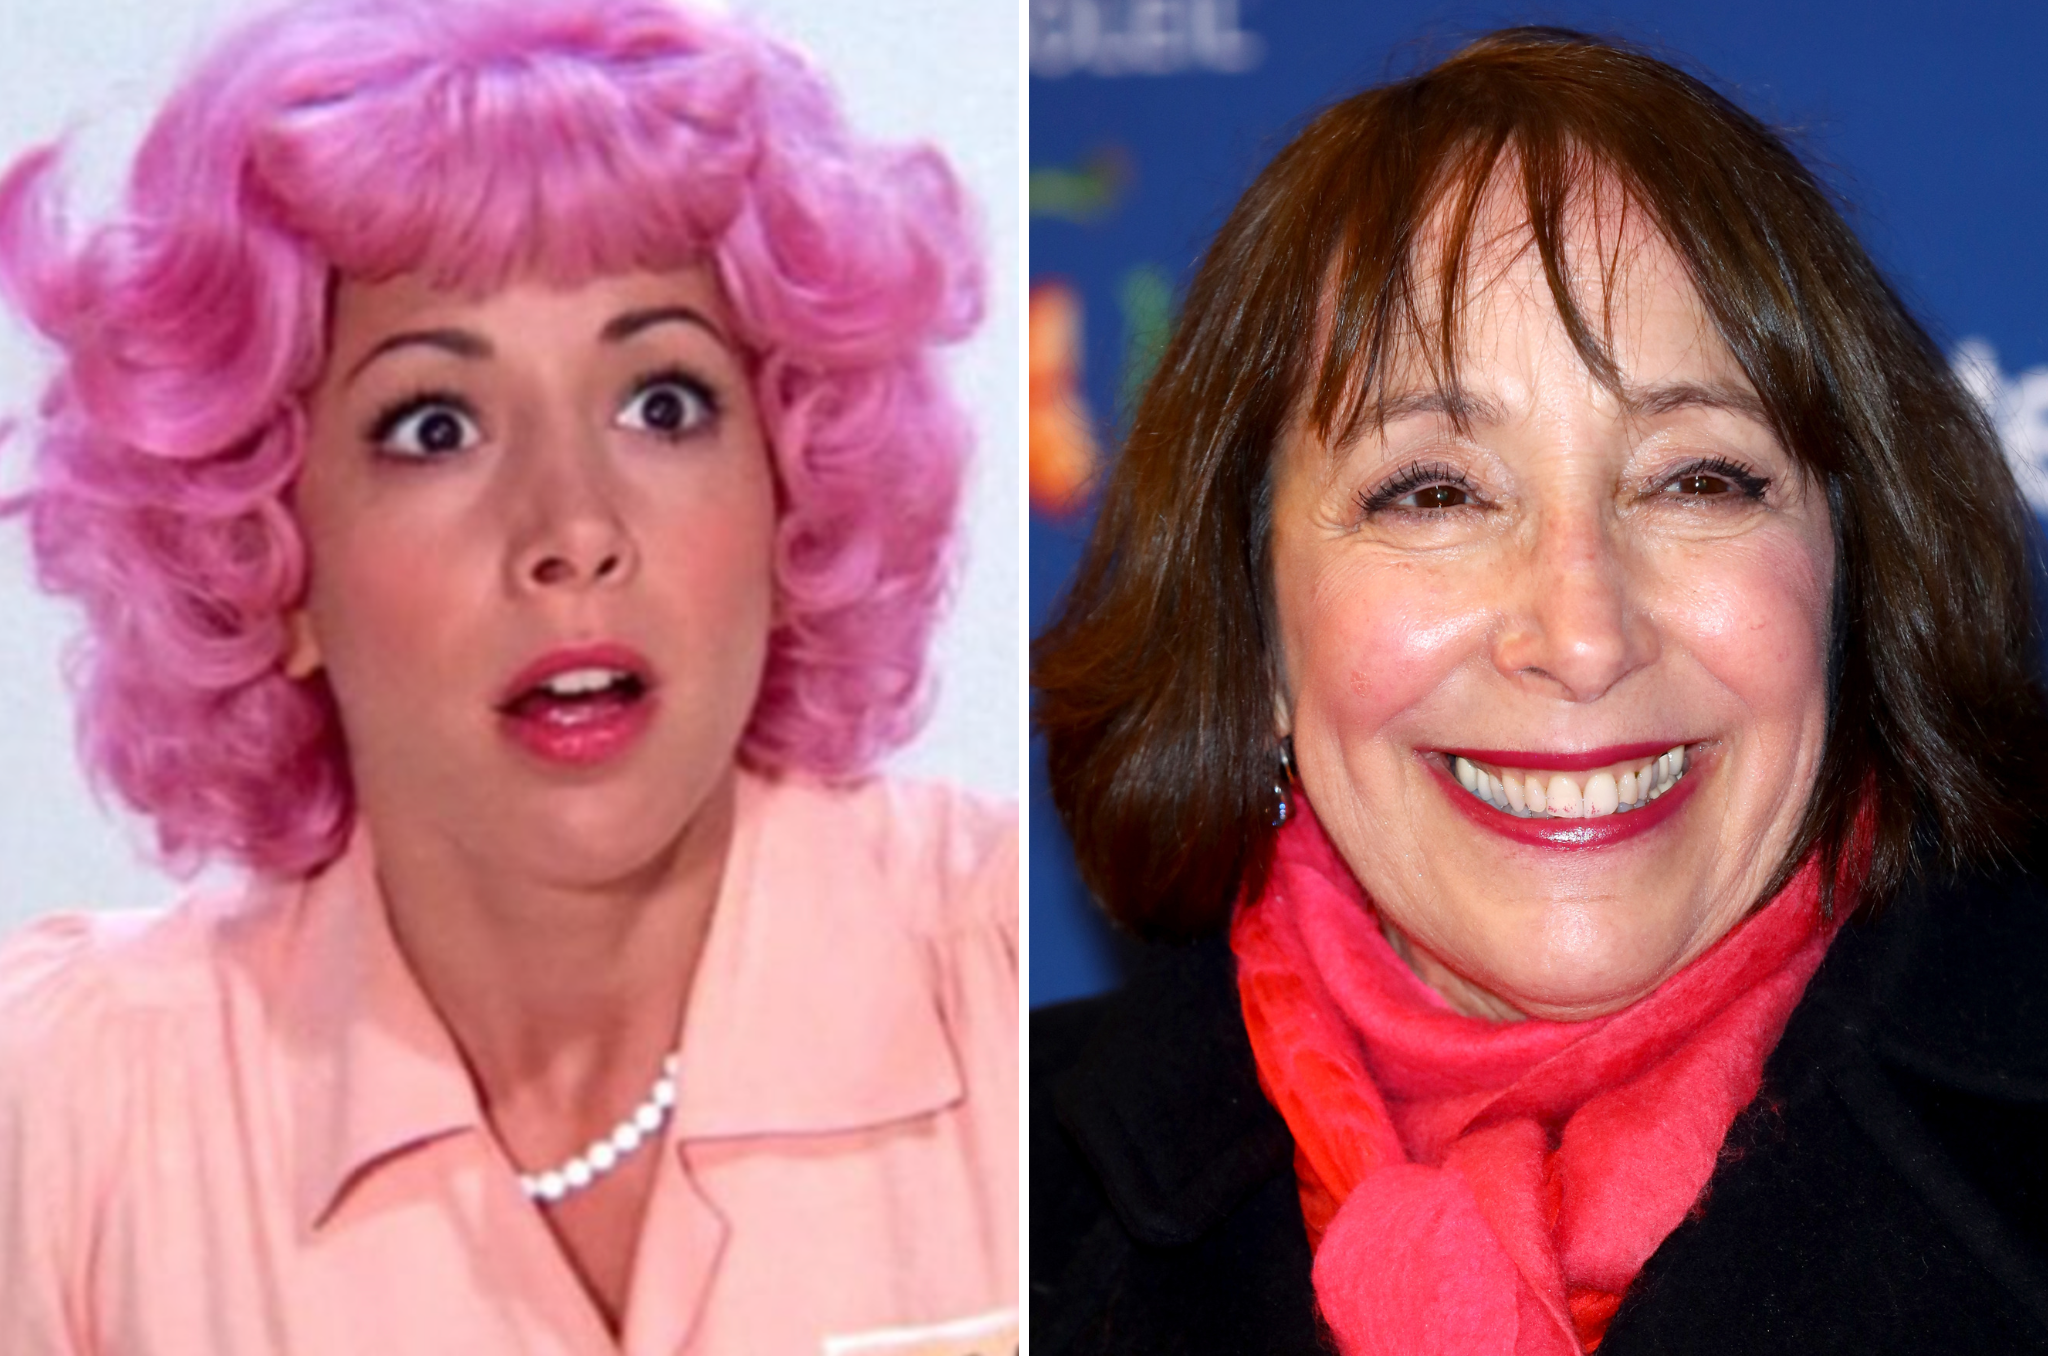 Didi Conn as Frenchy in ‘Grease’